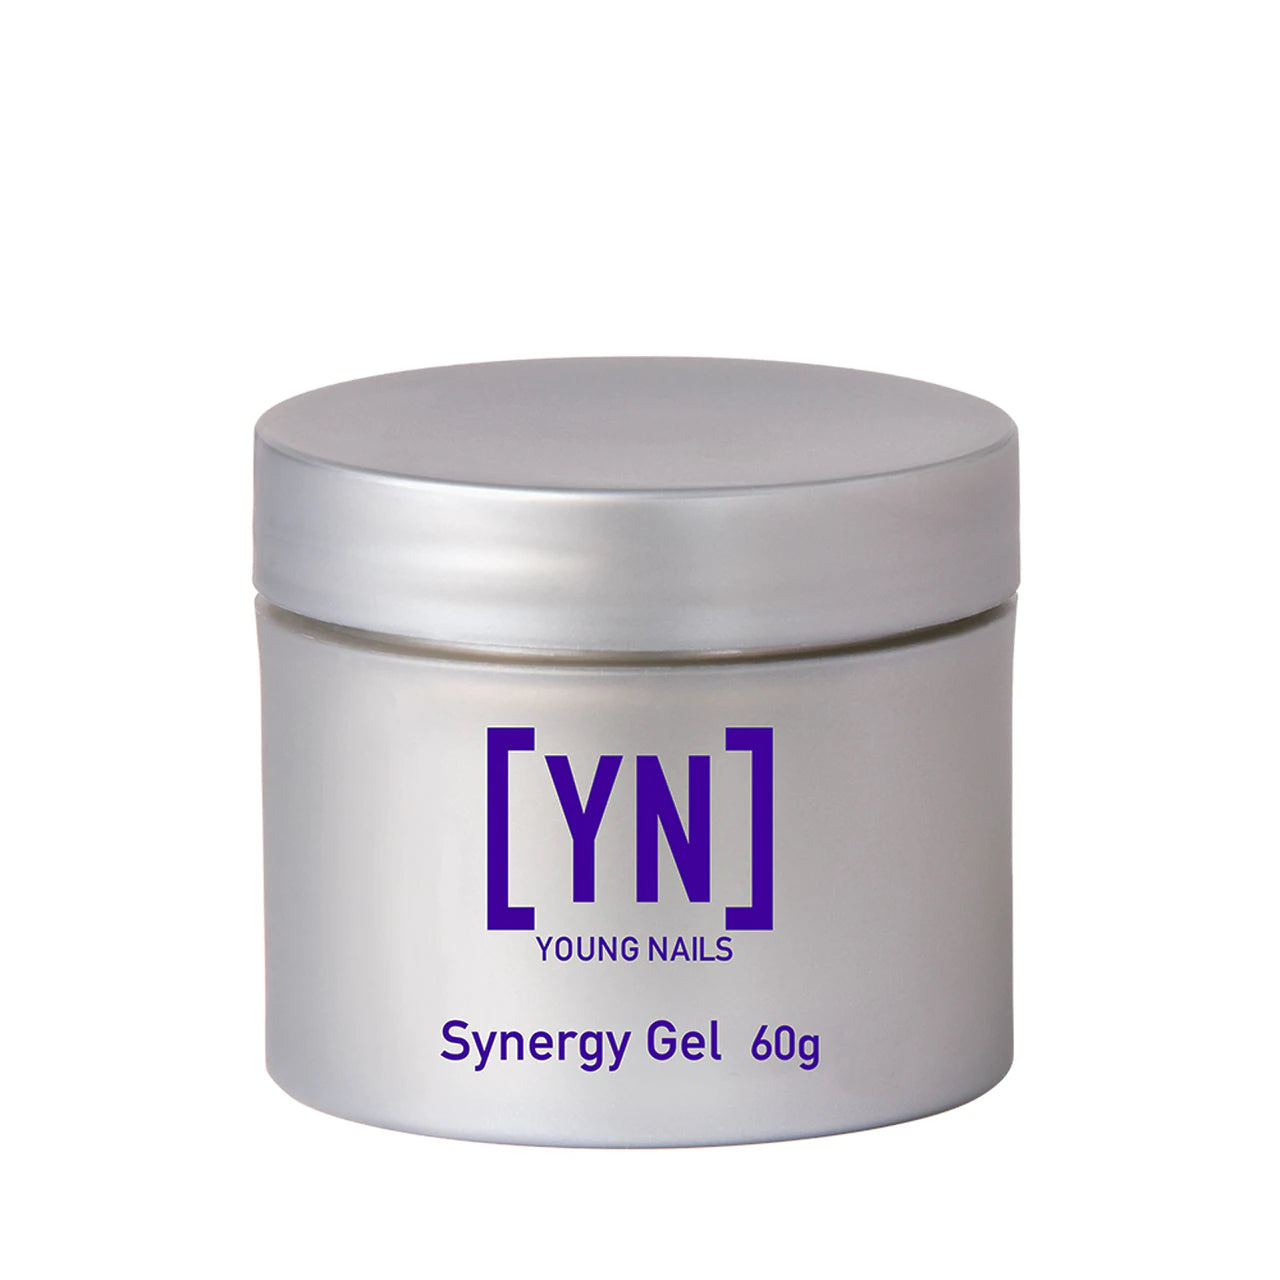 YOUNG NAILS Synergy Gel - Clear Sculptor